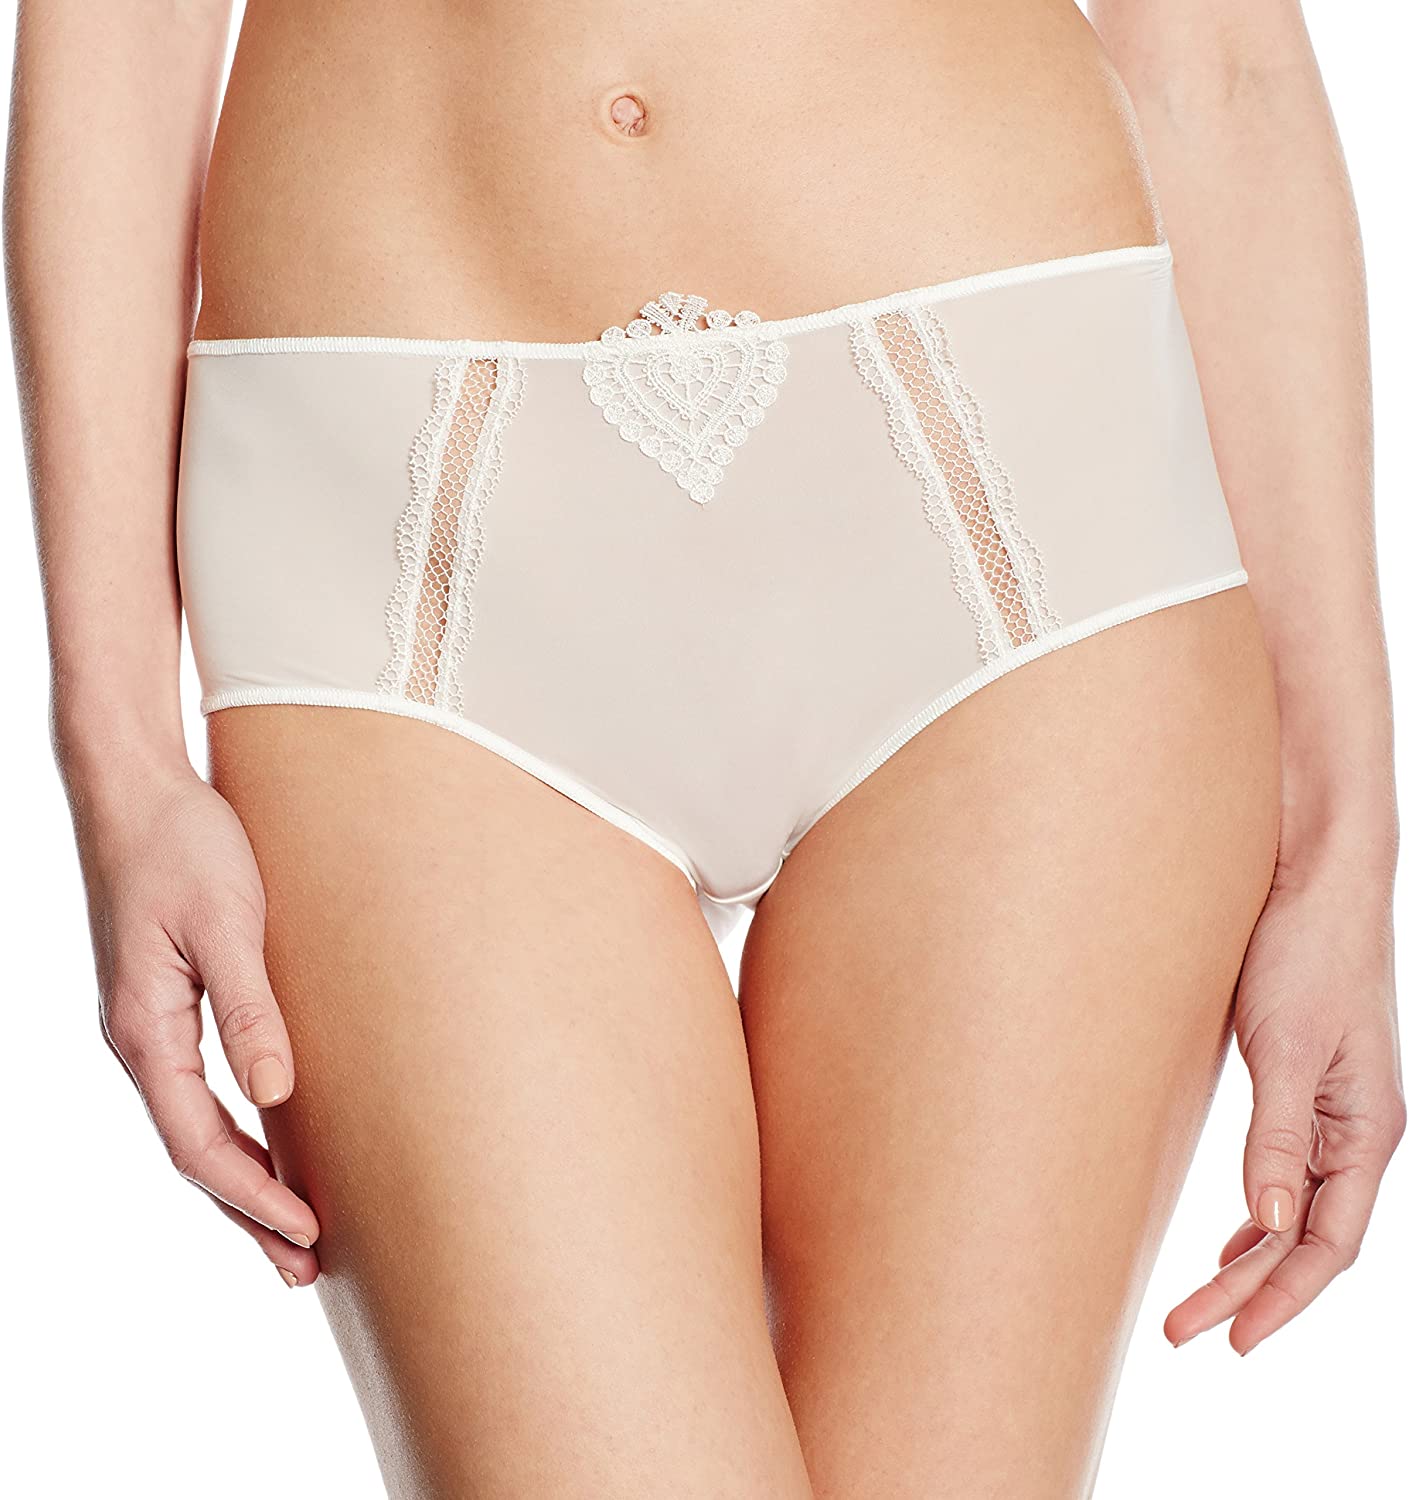 Maison Lejaby Elixir Attrape Coeur G61464 High Rise Brief Full Coverage Knickers